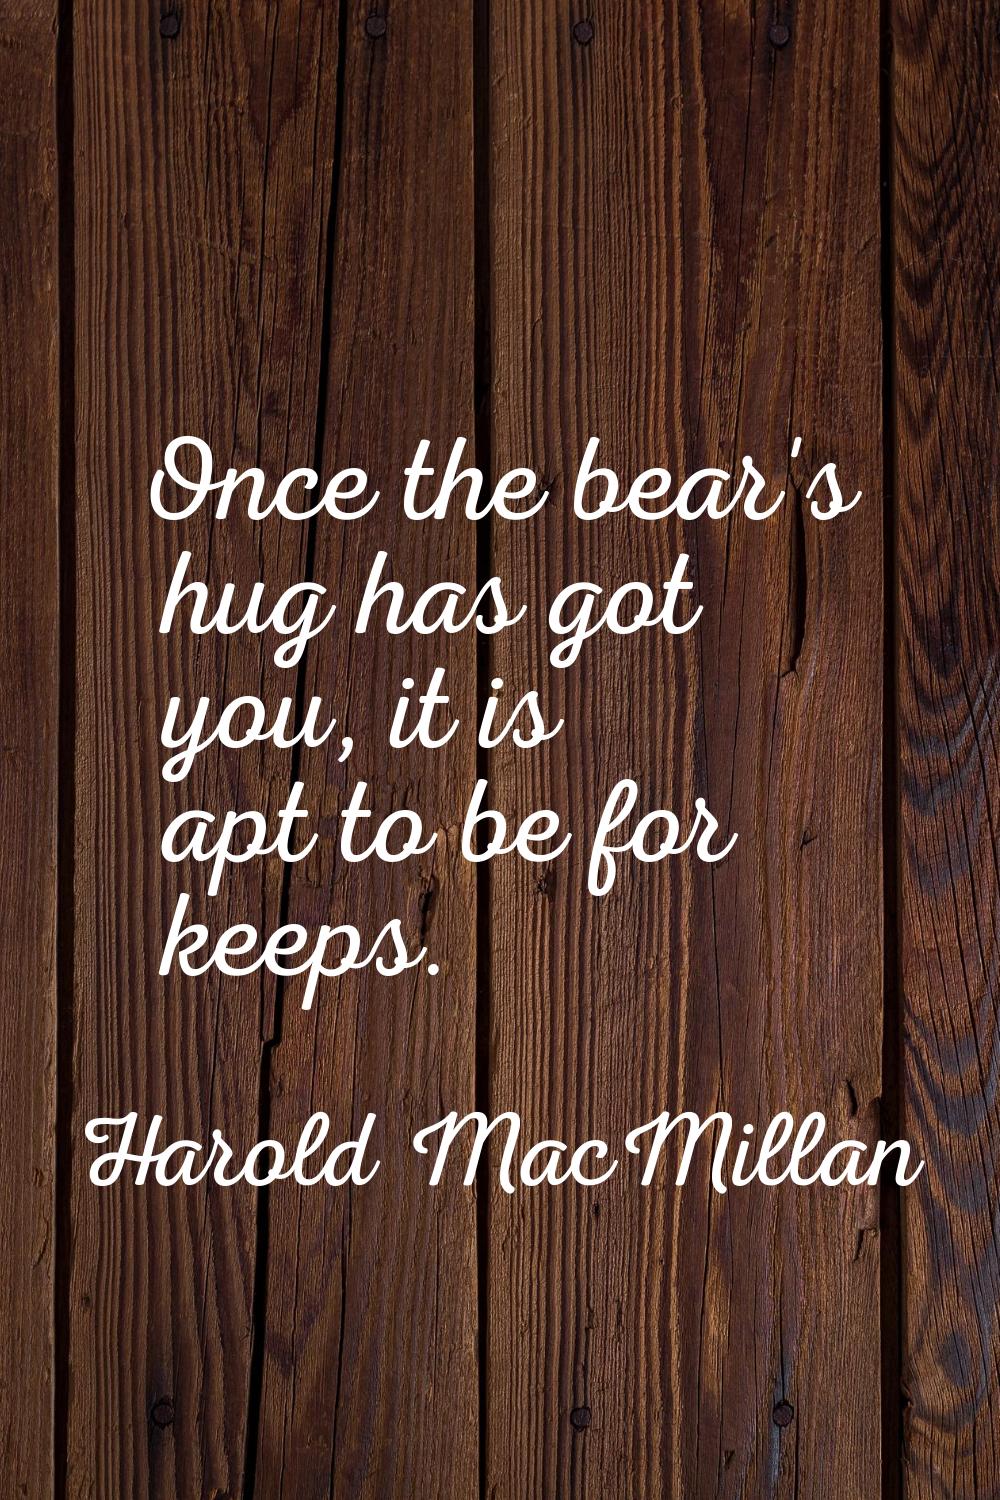 Once the bear's hug has got you, it is apt to be for keeps.